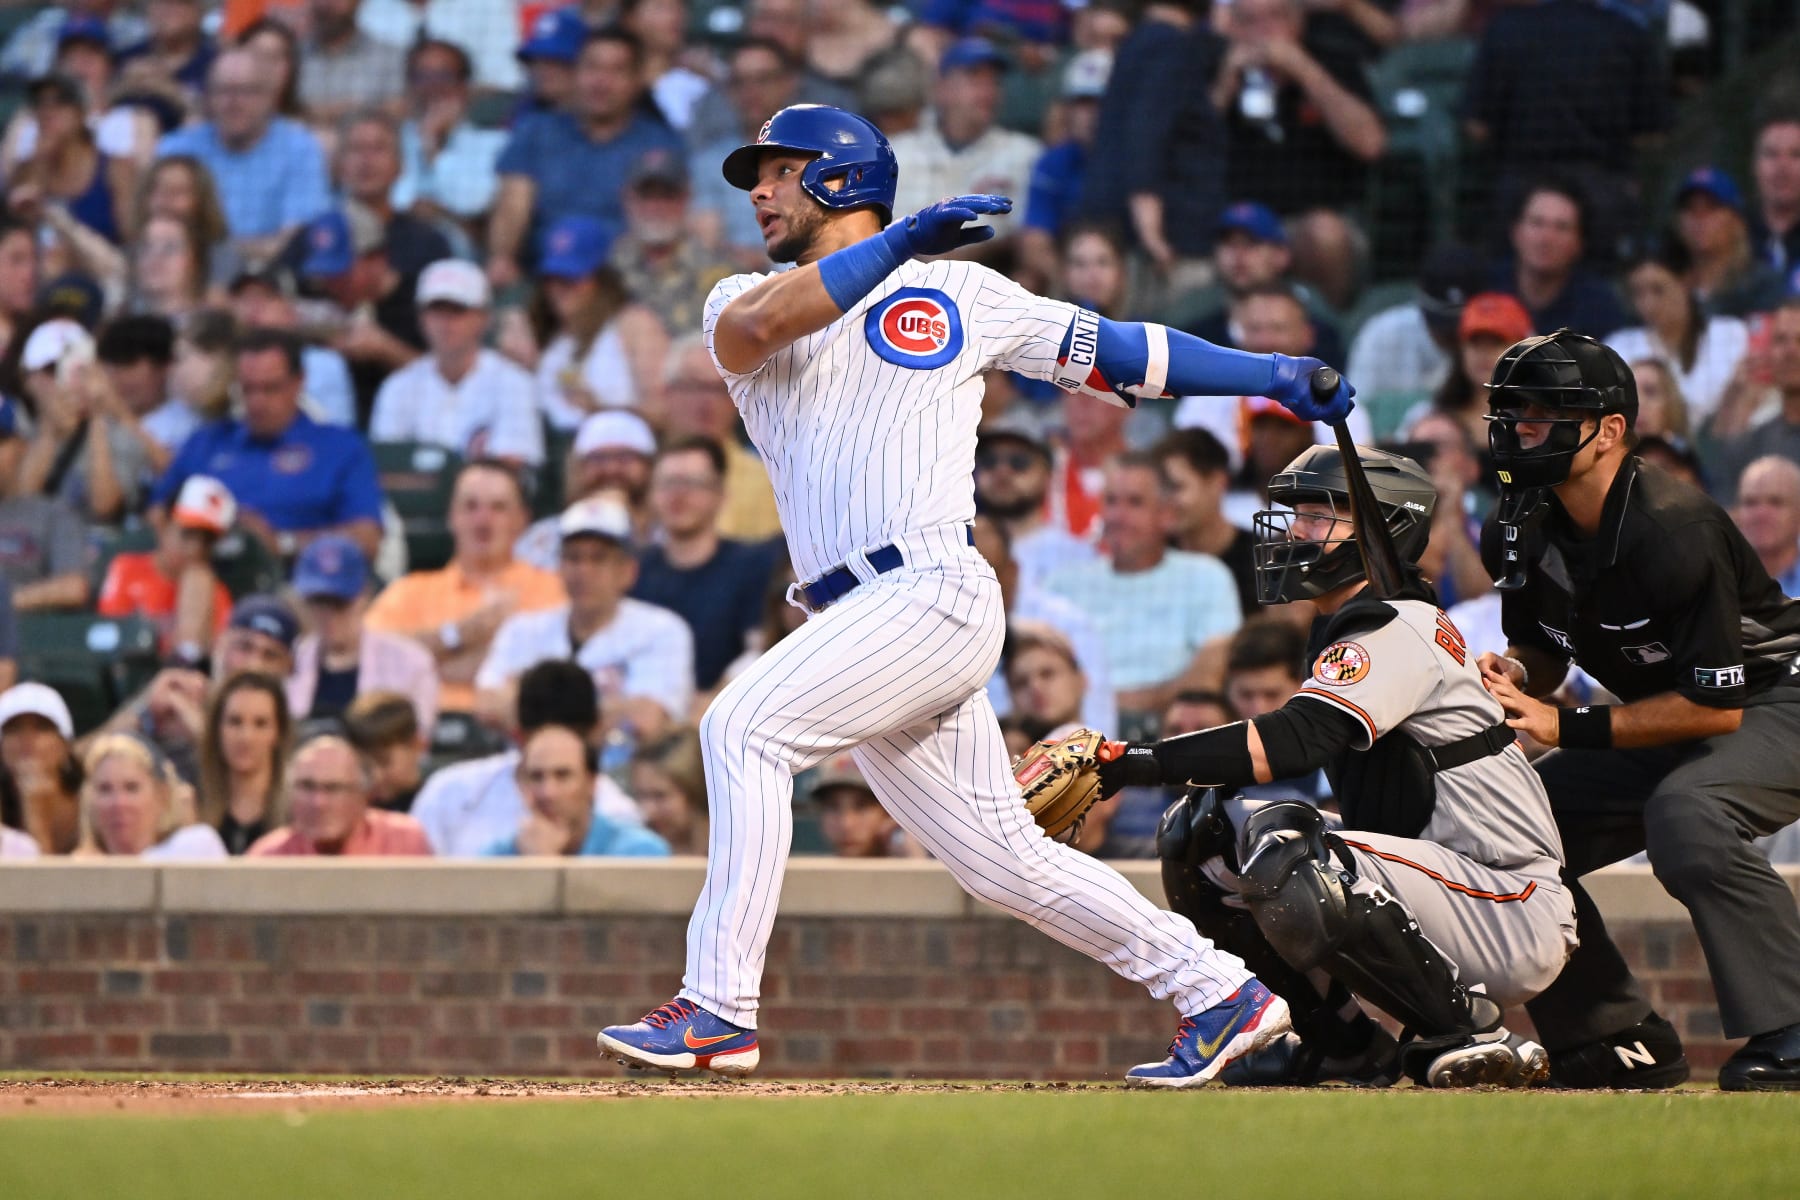 Cubs: Now's not the time to throw the towel in on Nick Madrigal